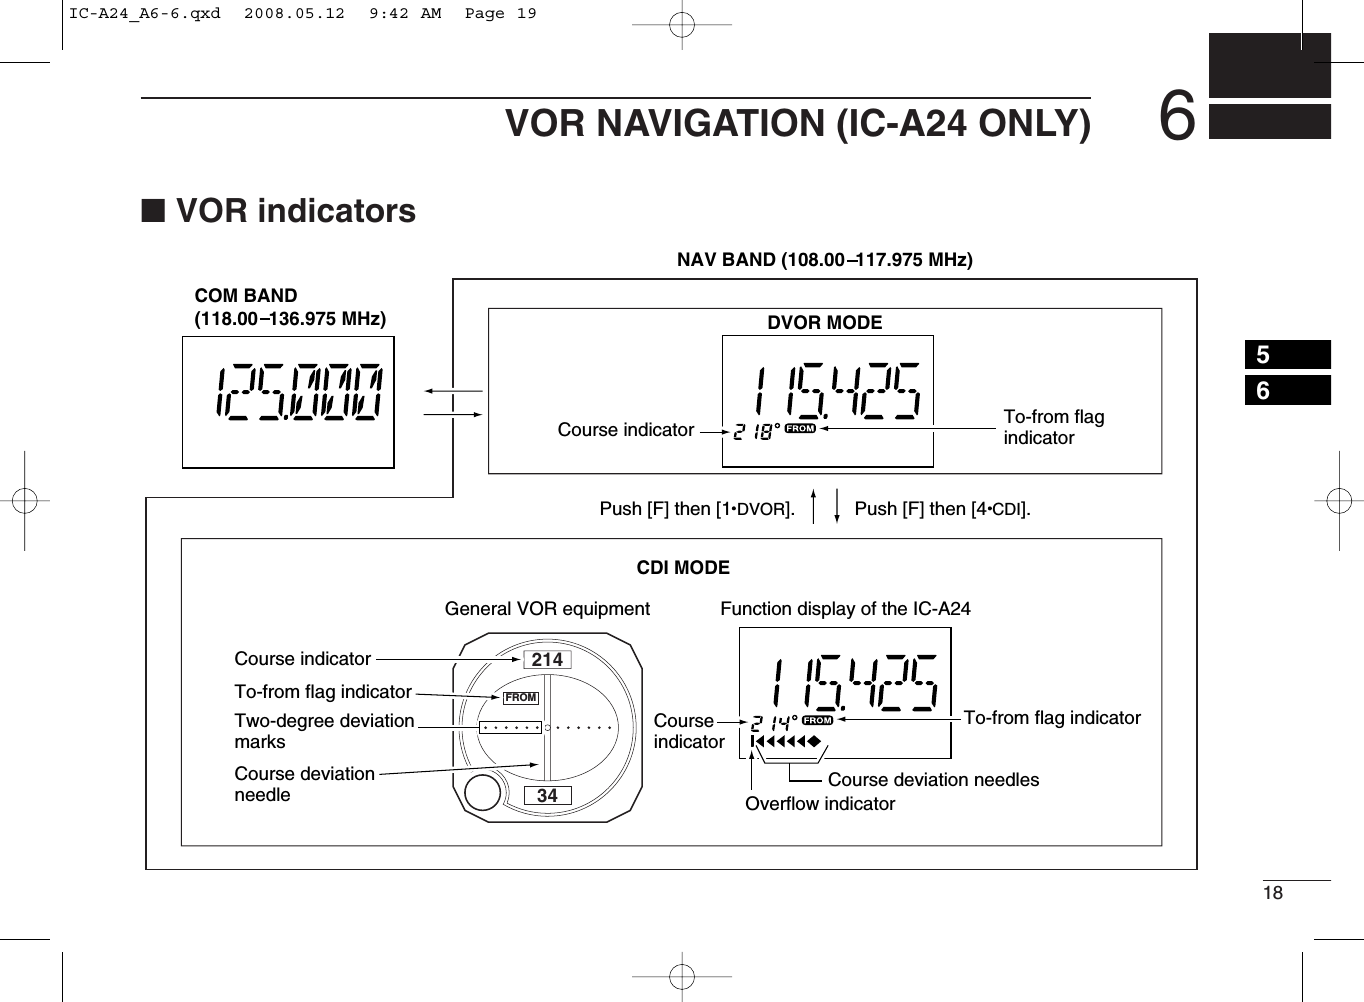 186VOR NAVIGATION (IC-A24 ONLY)■VOR indicators21434FROMCOM BAND(118.00  136.975 MHz)NAV BAND (108.00  117.975 MHz)DVOR MODEFunction display of the IC-A24General VOR equipmentTo-from flag indicatorCDI MODECourse indicatorCourseindicatorCourse deviation needlesOverflow indicatorPush [F] then [4 CDI].Push [F] then [1 DVOR].To-from flag indicatorCourse indicatorCourse deviation needleTo-from flag indicatorTwo-degree deviation marks56IC-A24_A6-6.qxd  2008.05.12  9:42 AM  Page 19